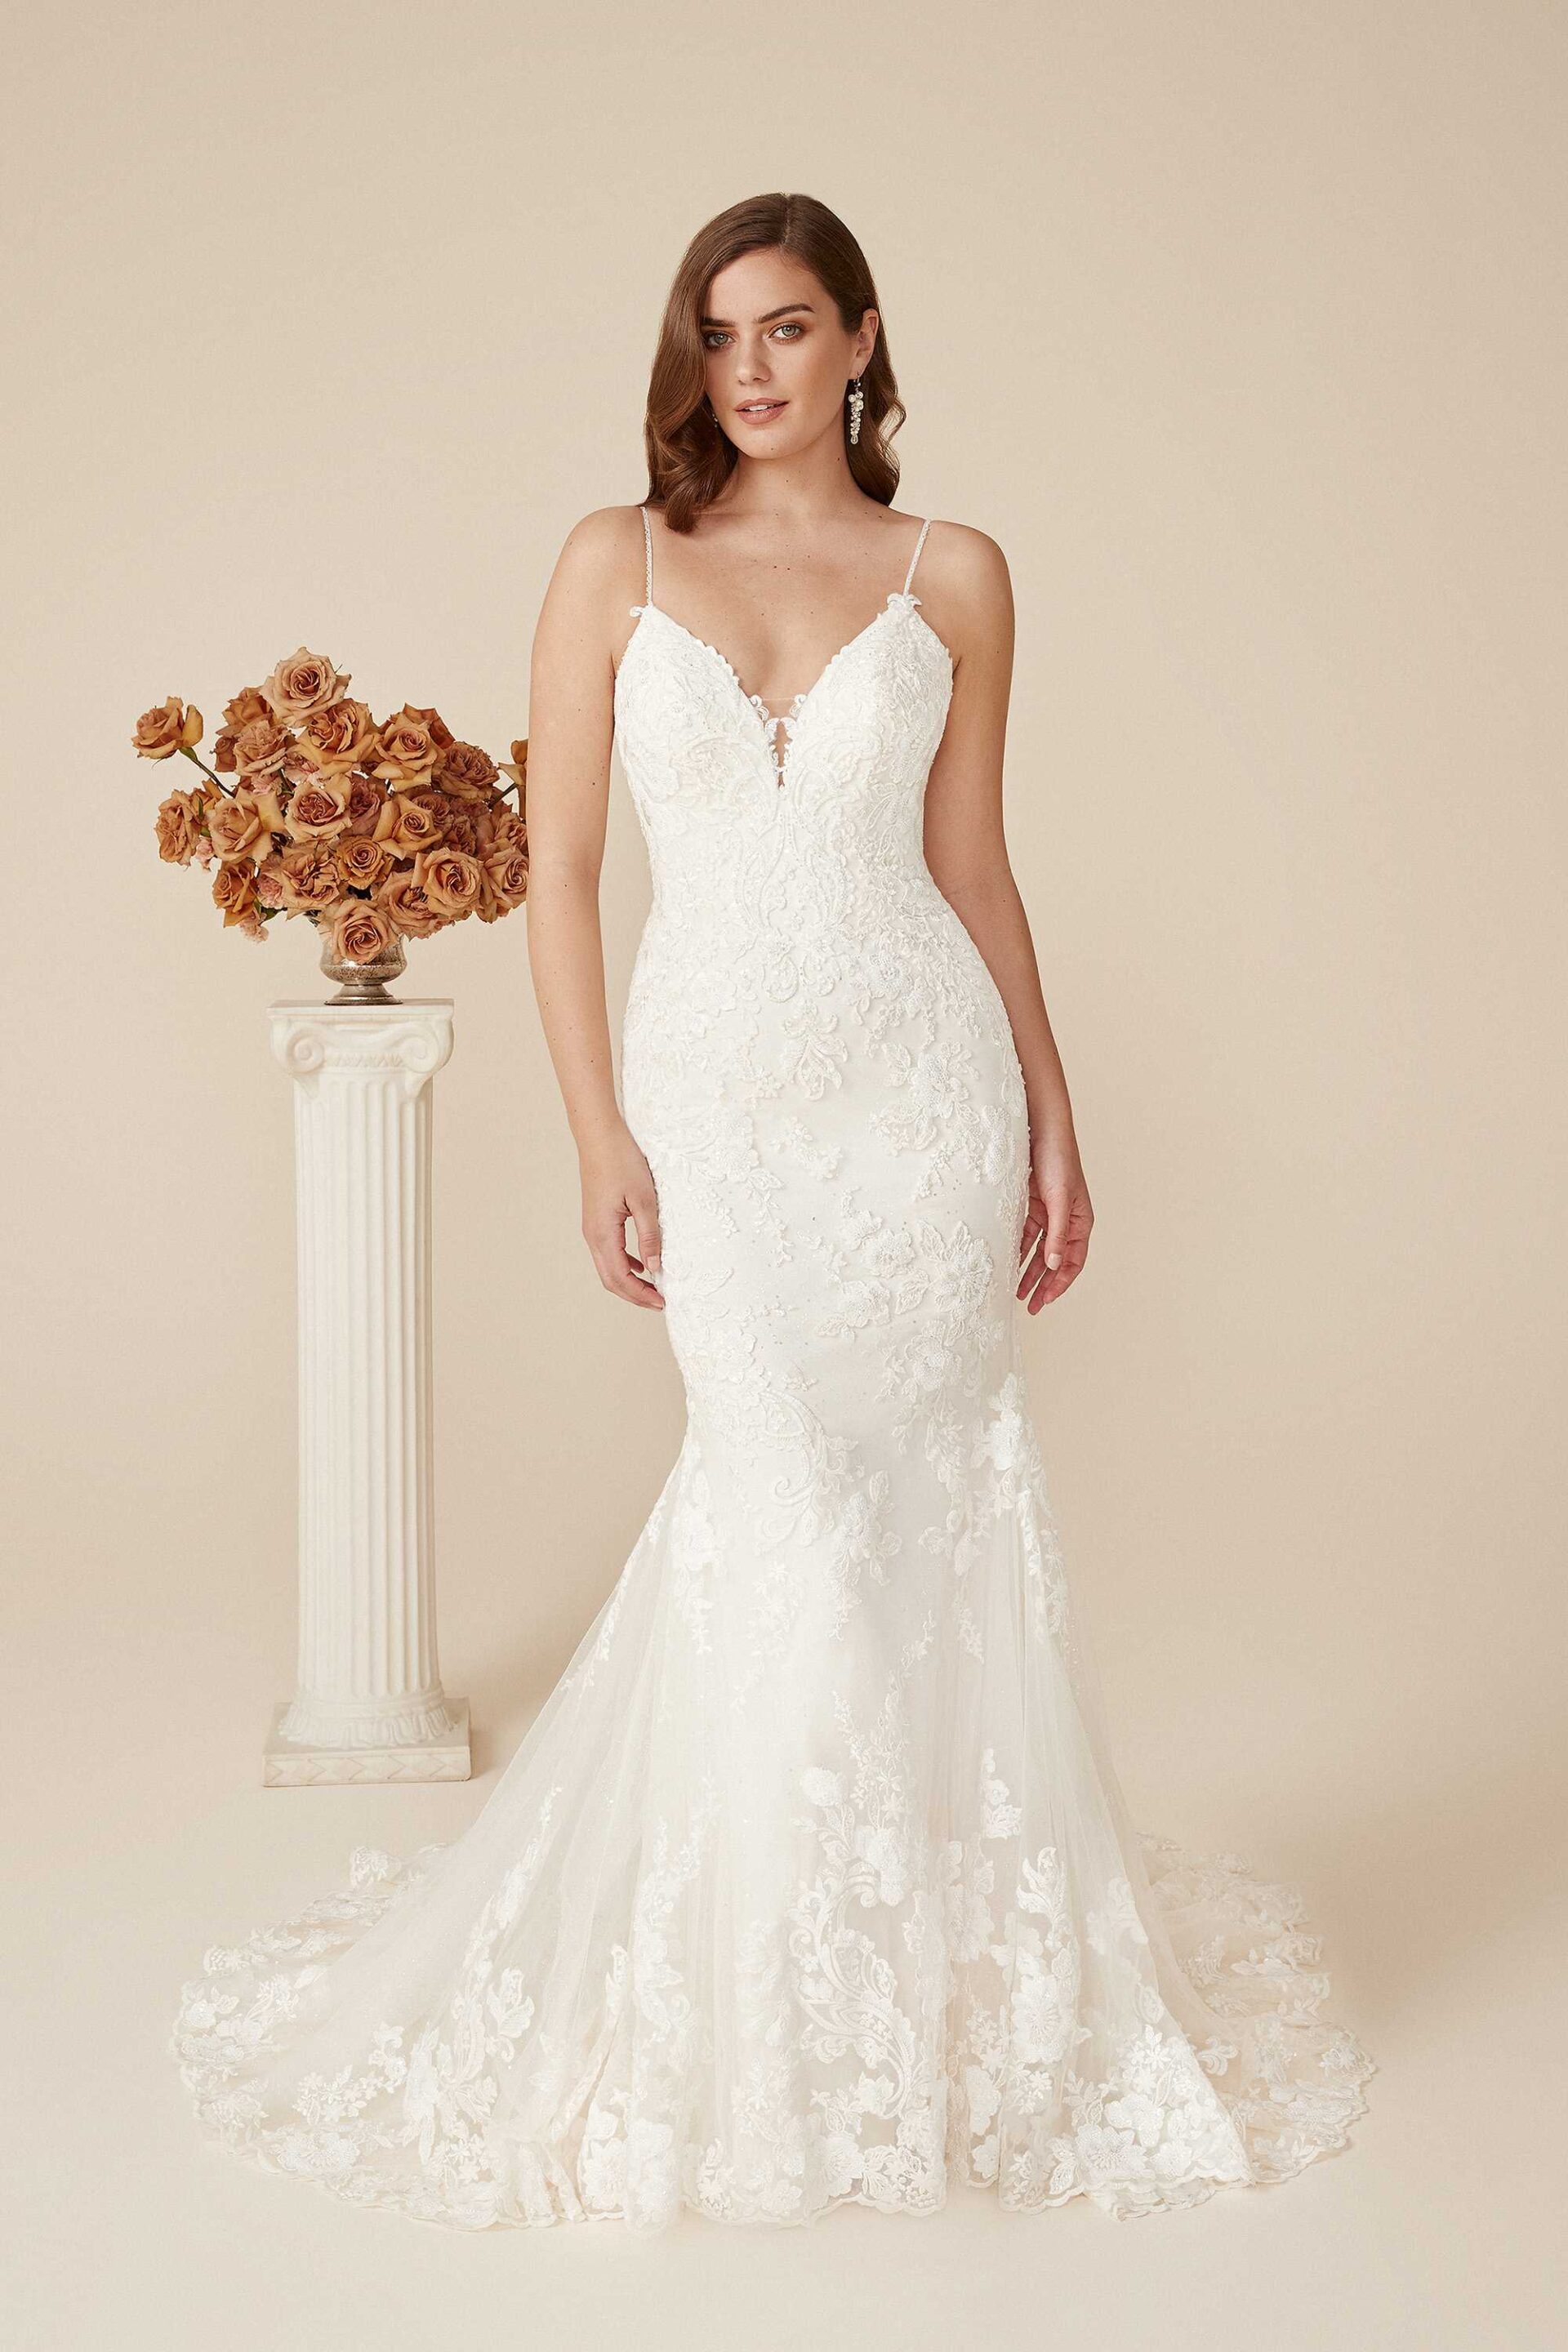 Low Back Beaded Lace Fitted Bridal Gown Deryn Justin Alexander Wedding Dresses in Maryland